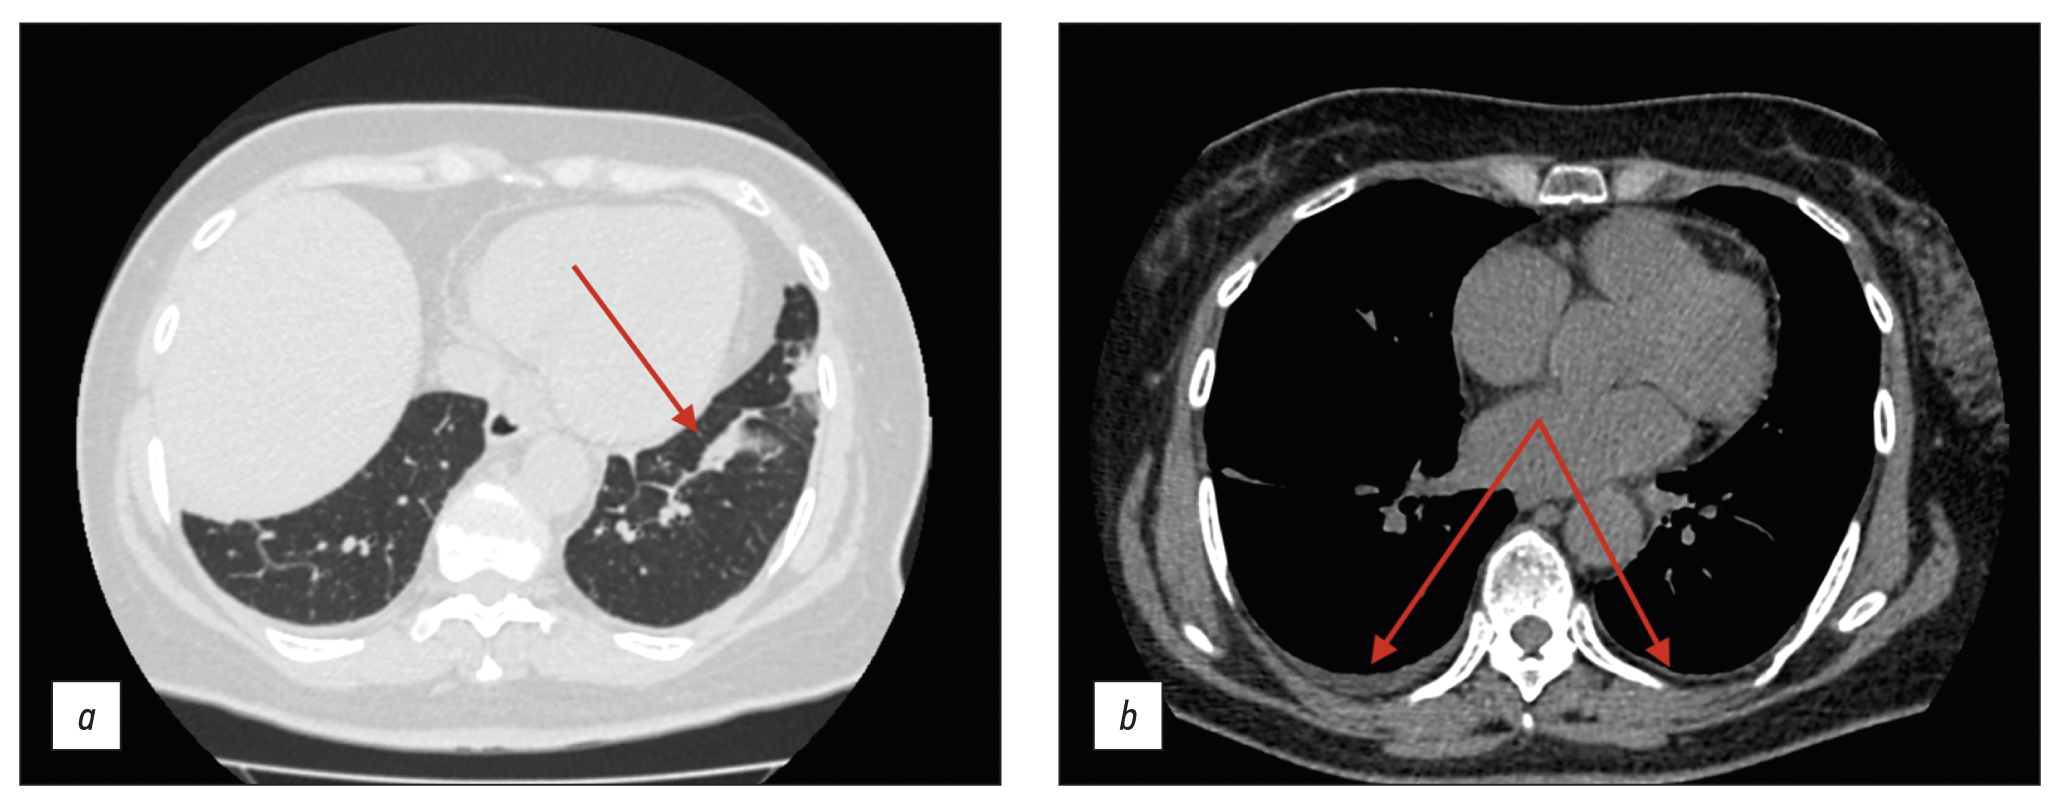 Computed tomography in the diagnosis of fever of unknown origin: A case report